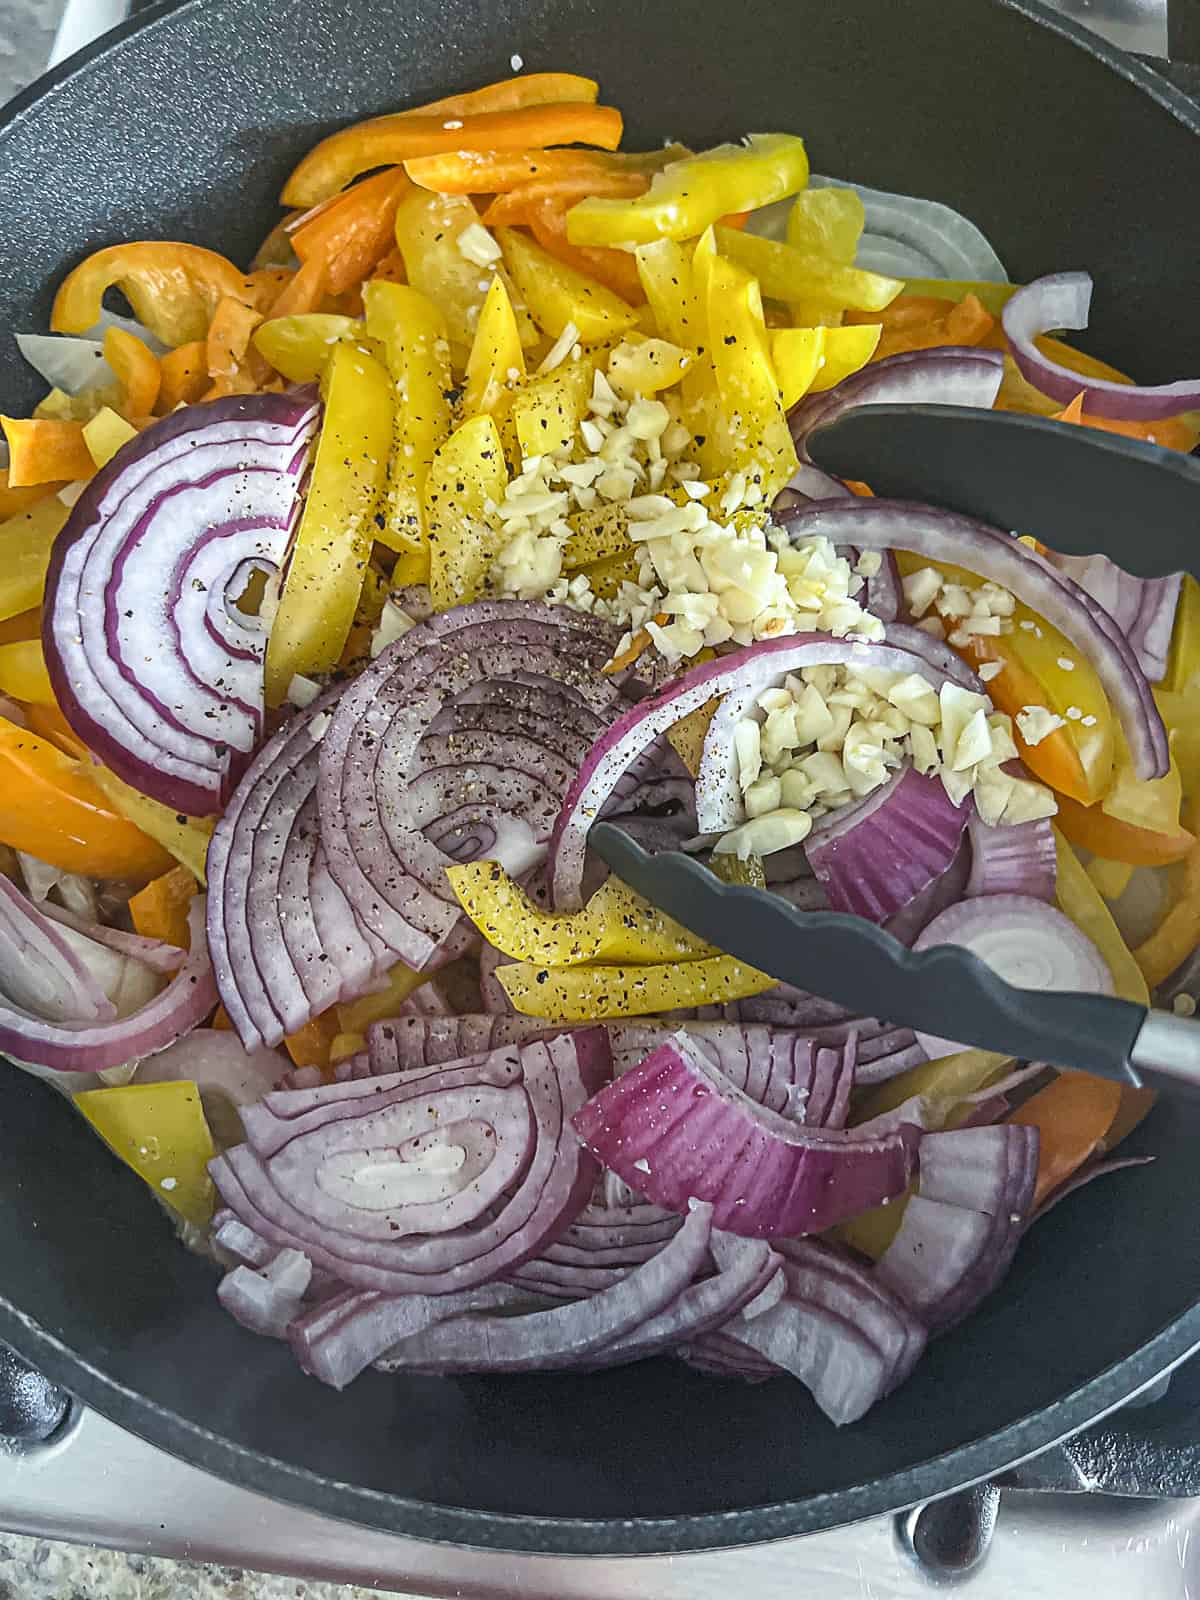 Traeger Taco Night Smoker Recipe Side Dish Idea For Sauteed Onions Peppers And Garlic Vegetables